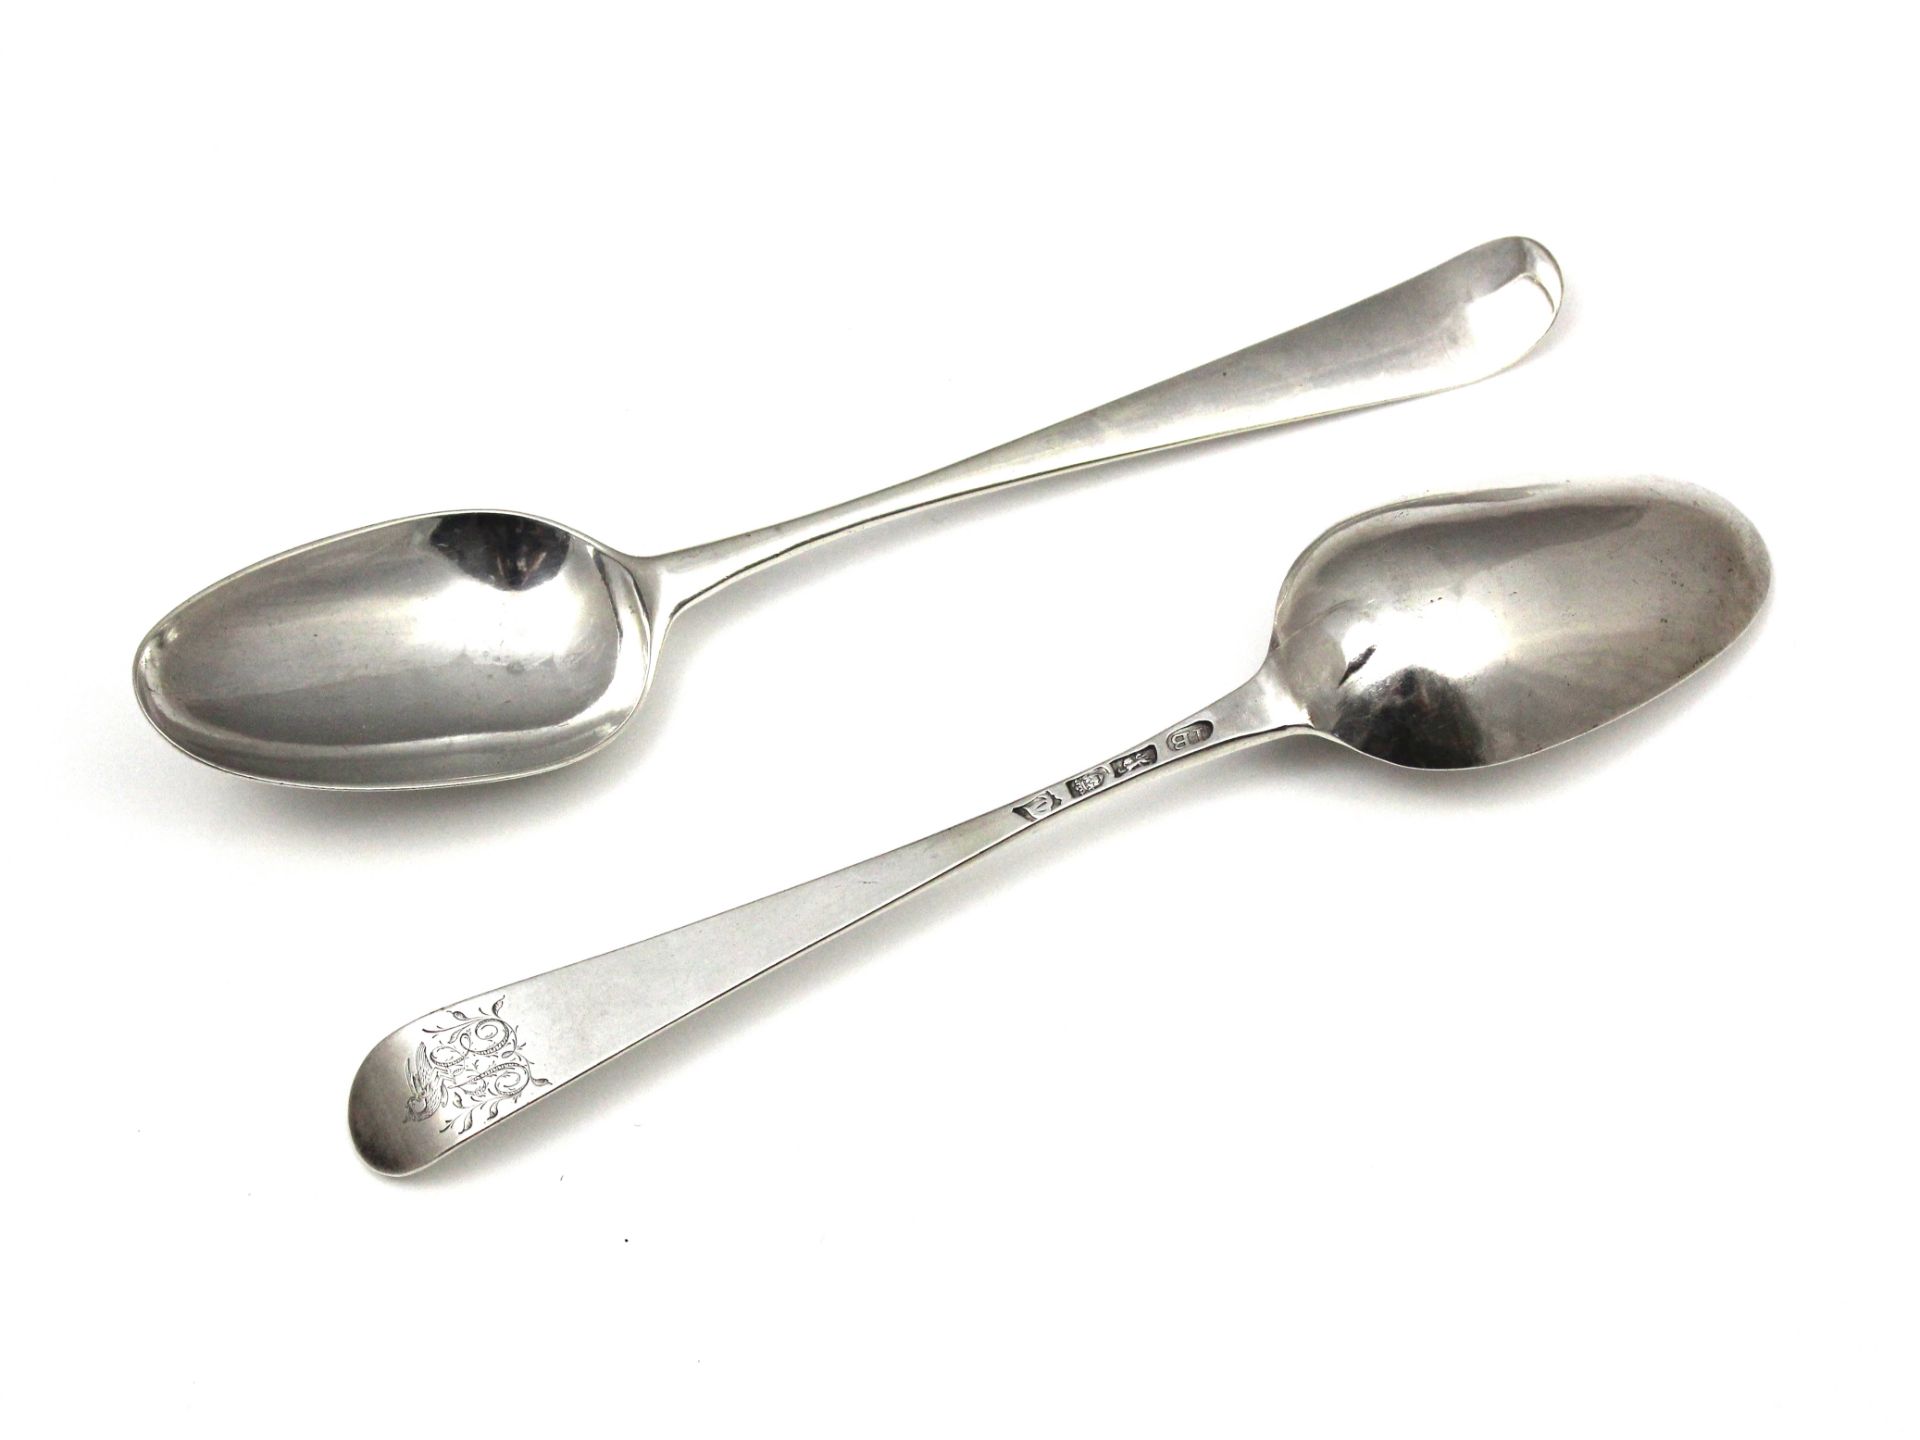 A pair of Antique George III Sterling Silver tablespoons by John Bourne, London 1774. In Old English